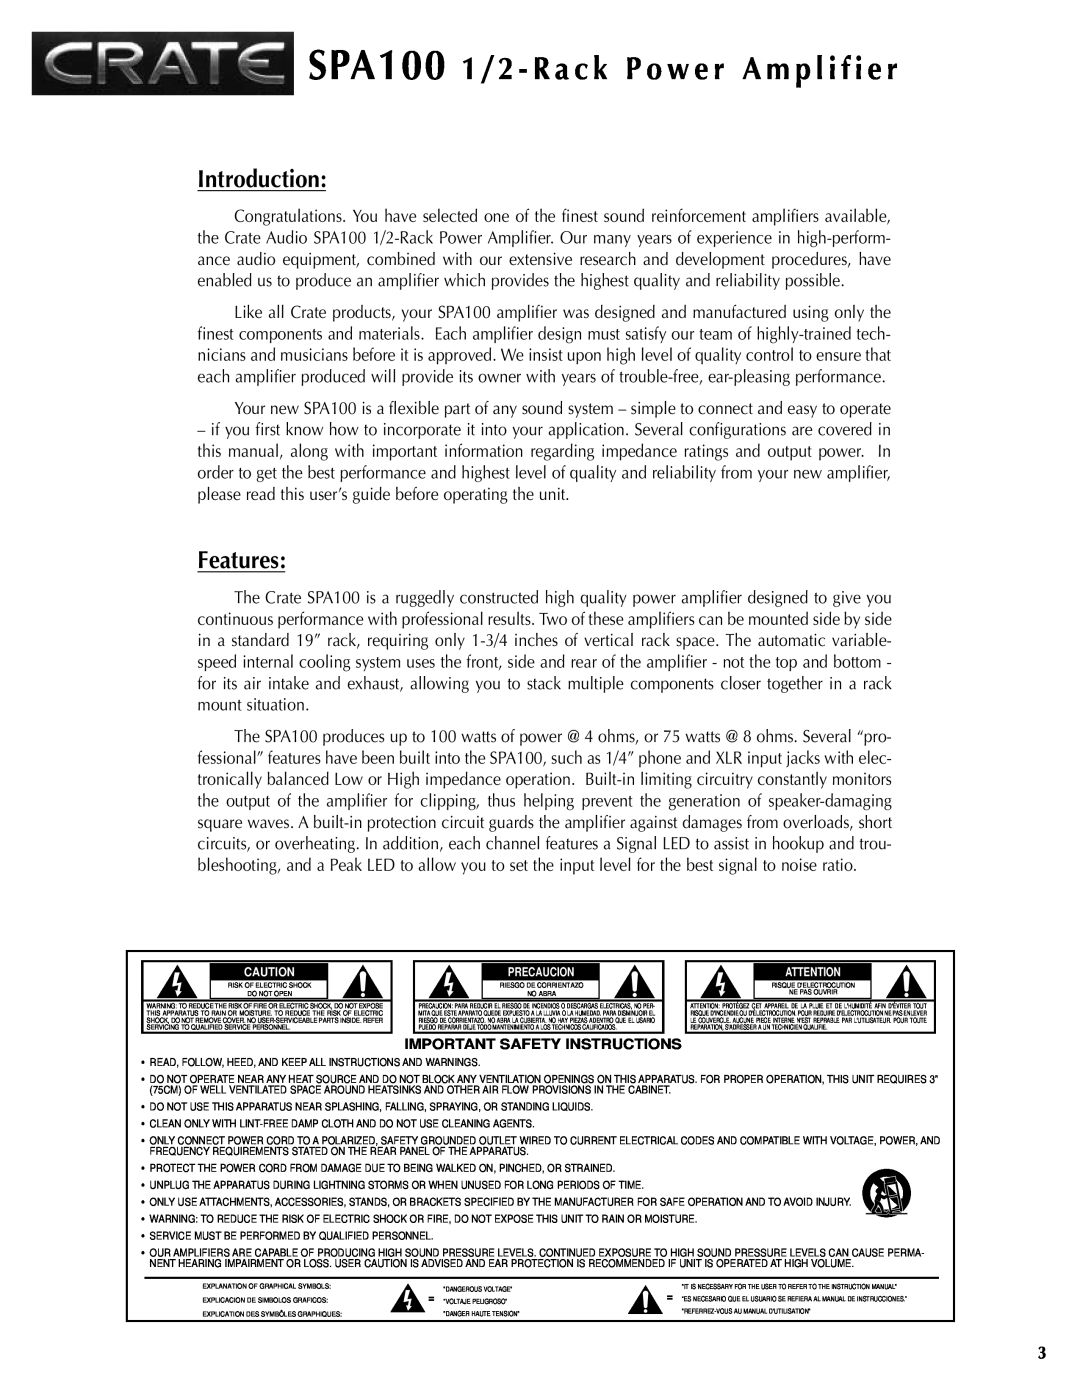 Crate Amplifiers SPA100 manual Introduction, Features, Important Safety Instructions 